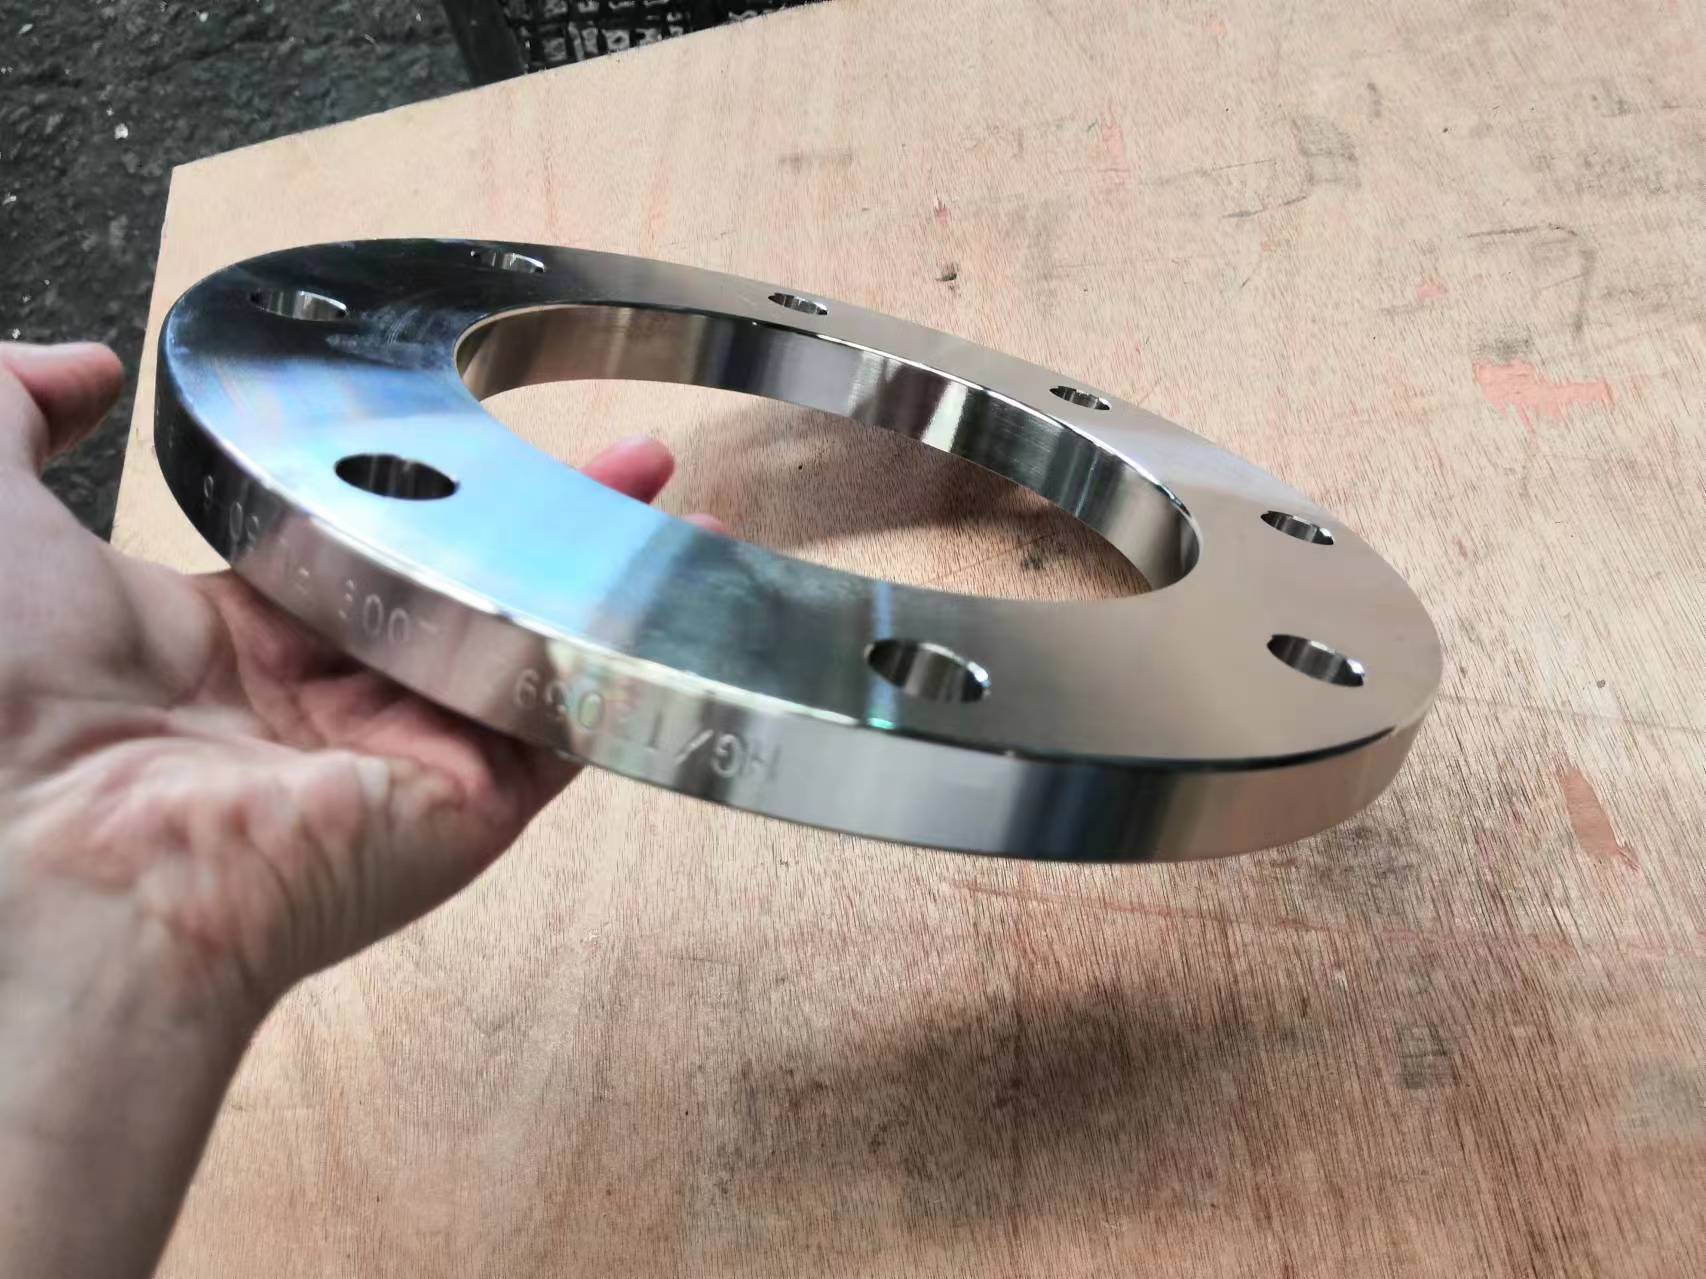 The Plate Flange Buying Guide: Everything You Need to Know